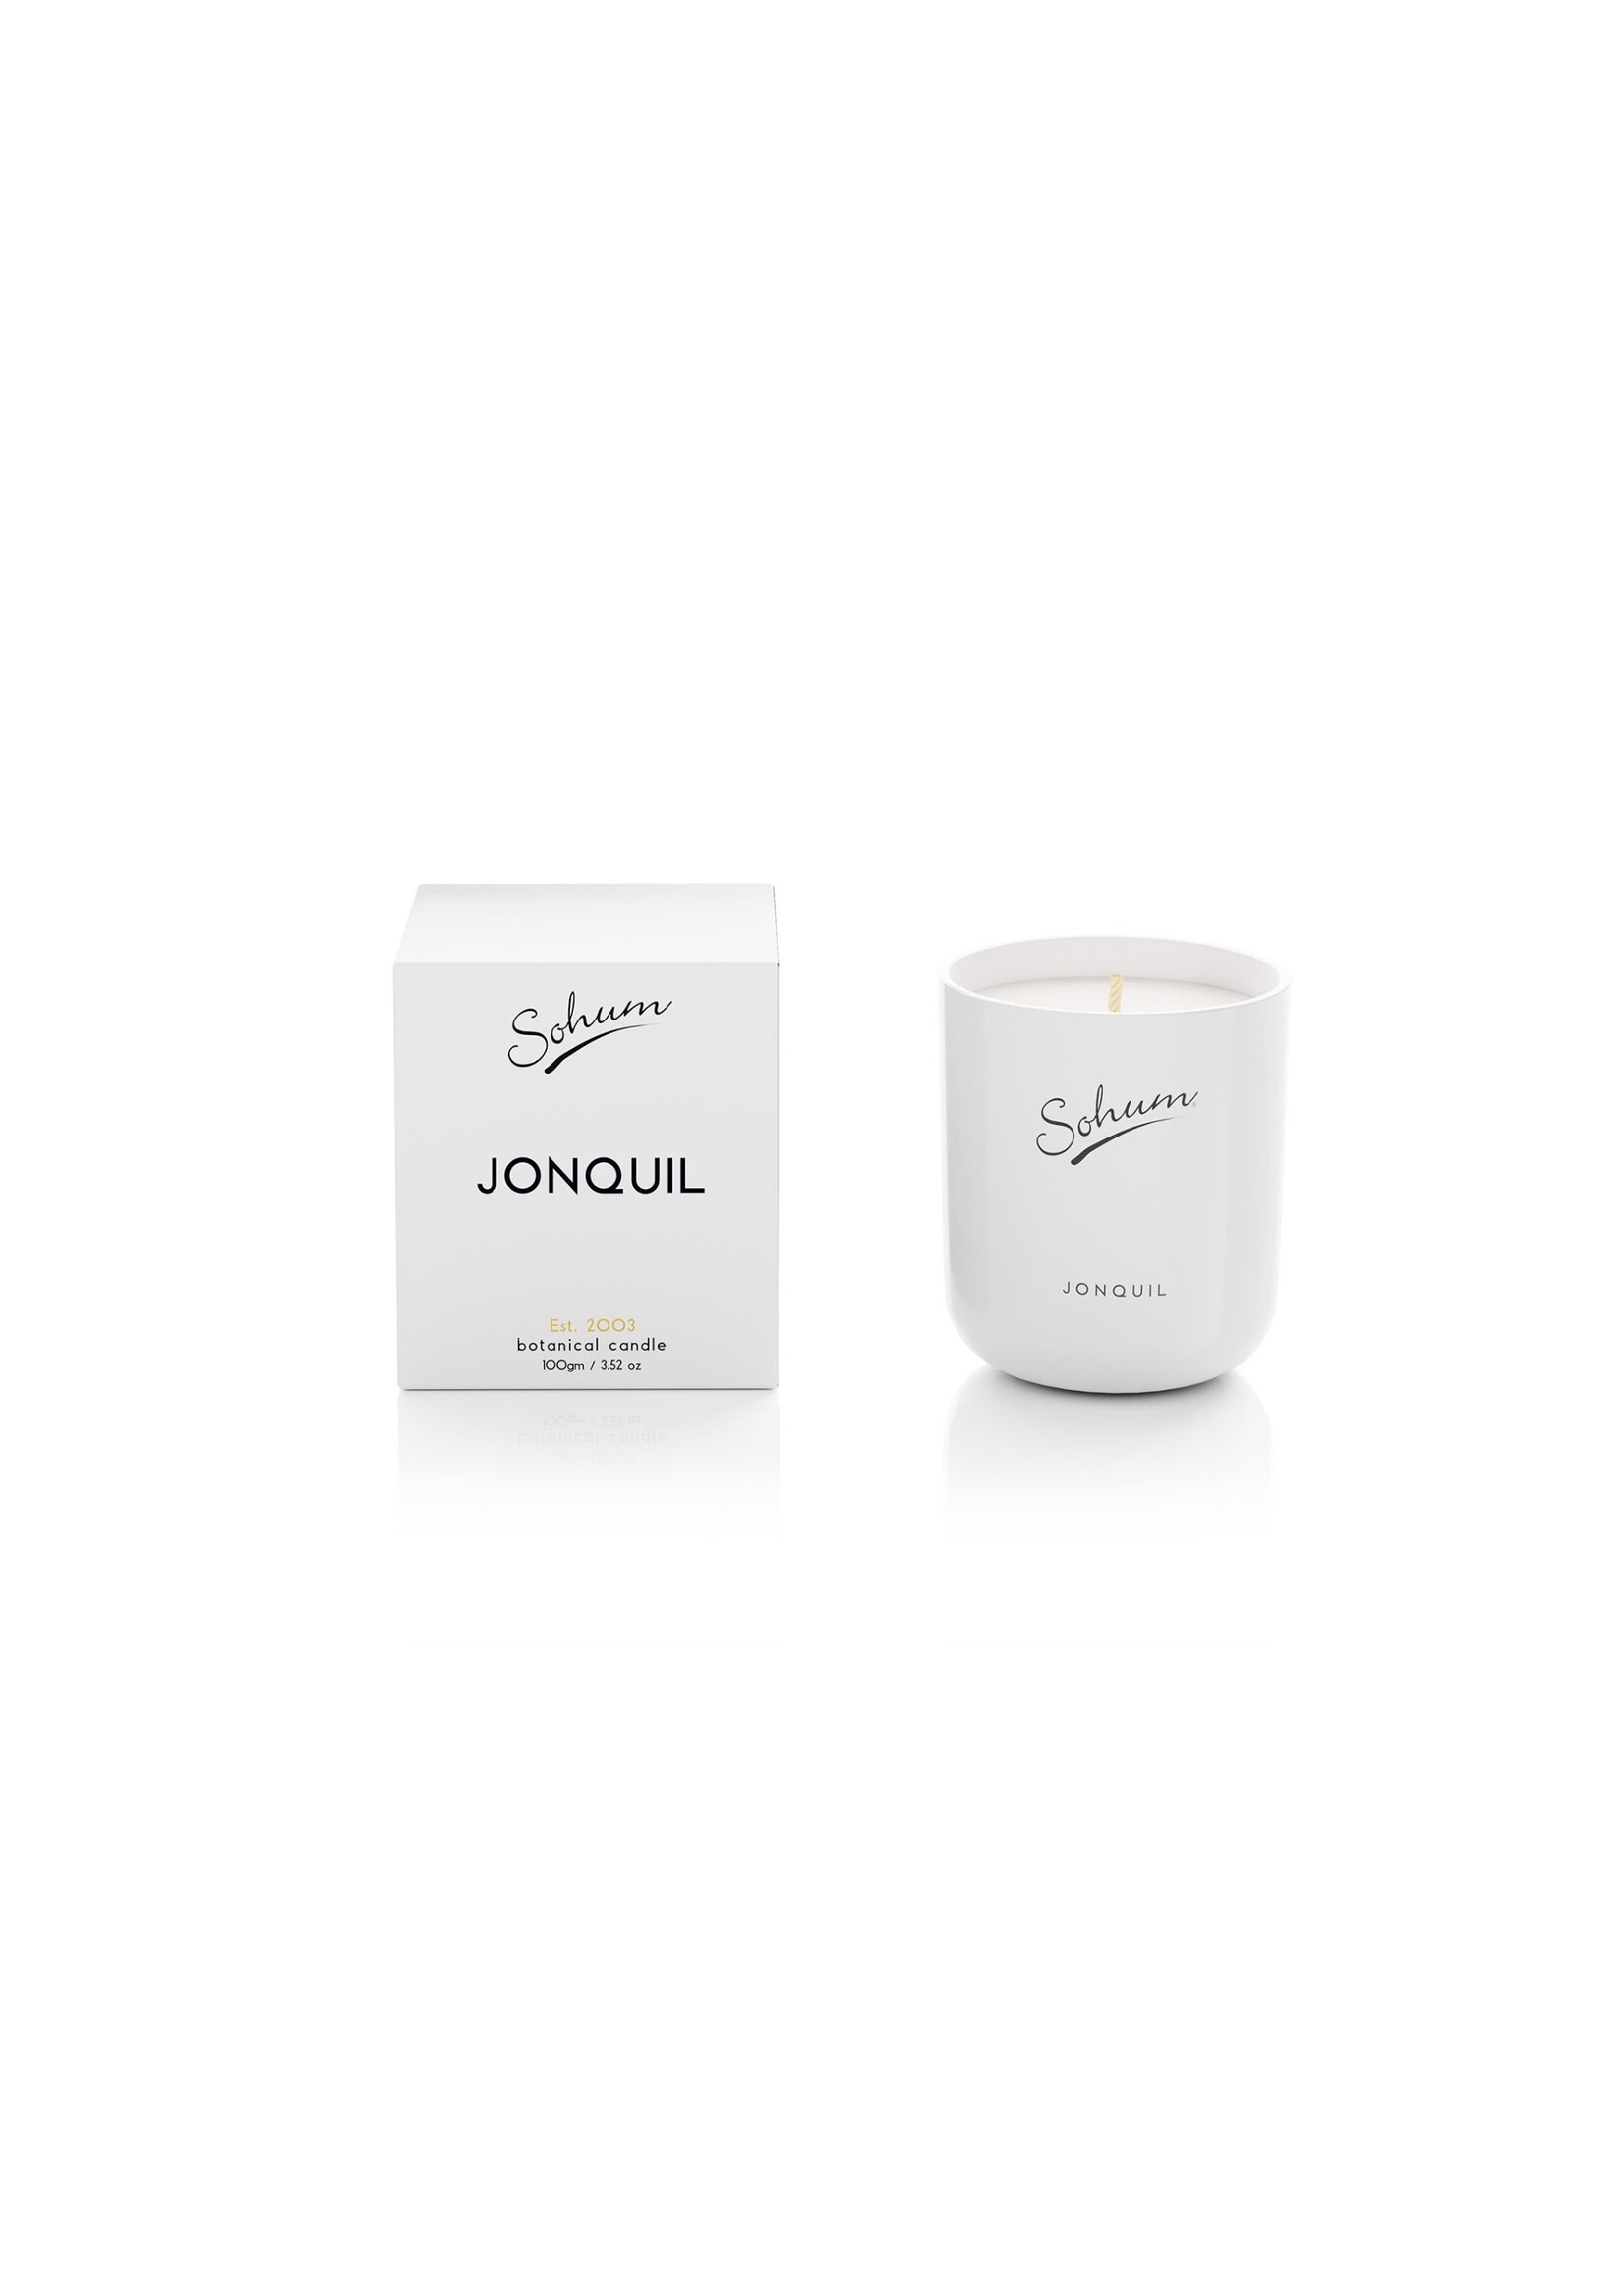 SIGNATURE CANDLETTE JONQUIL